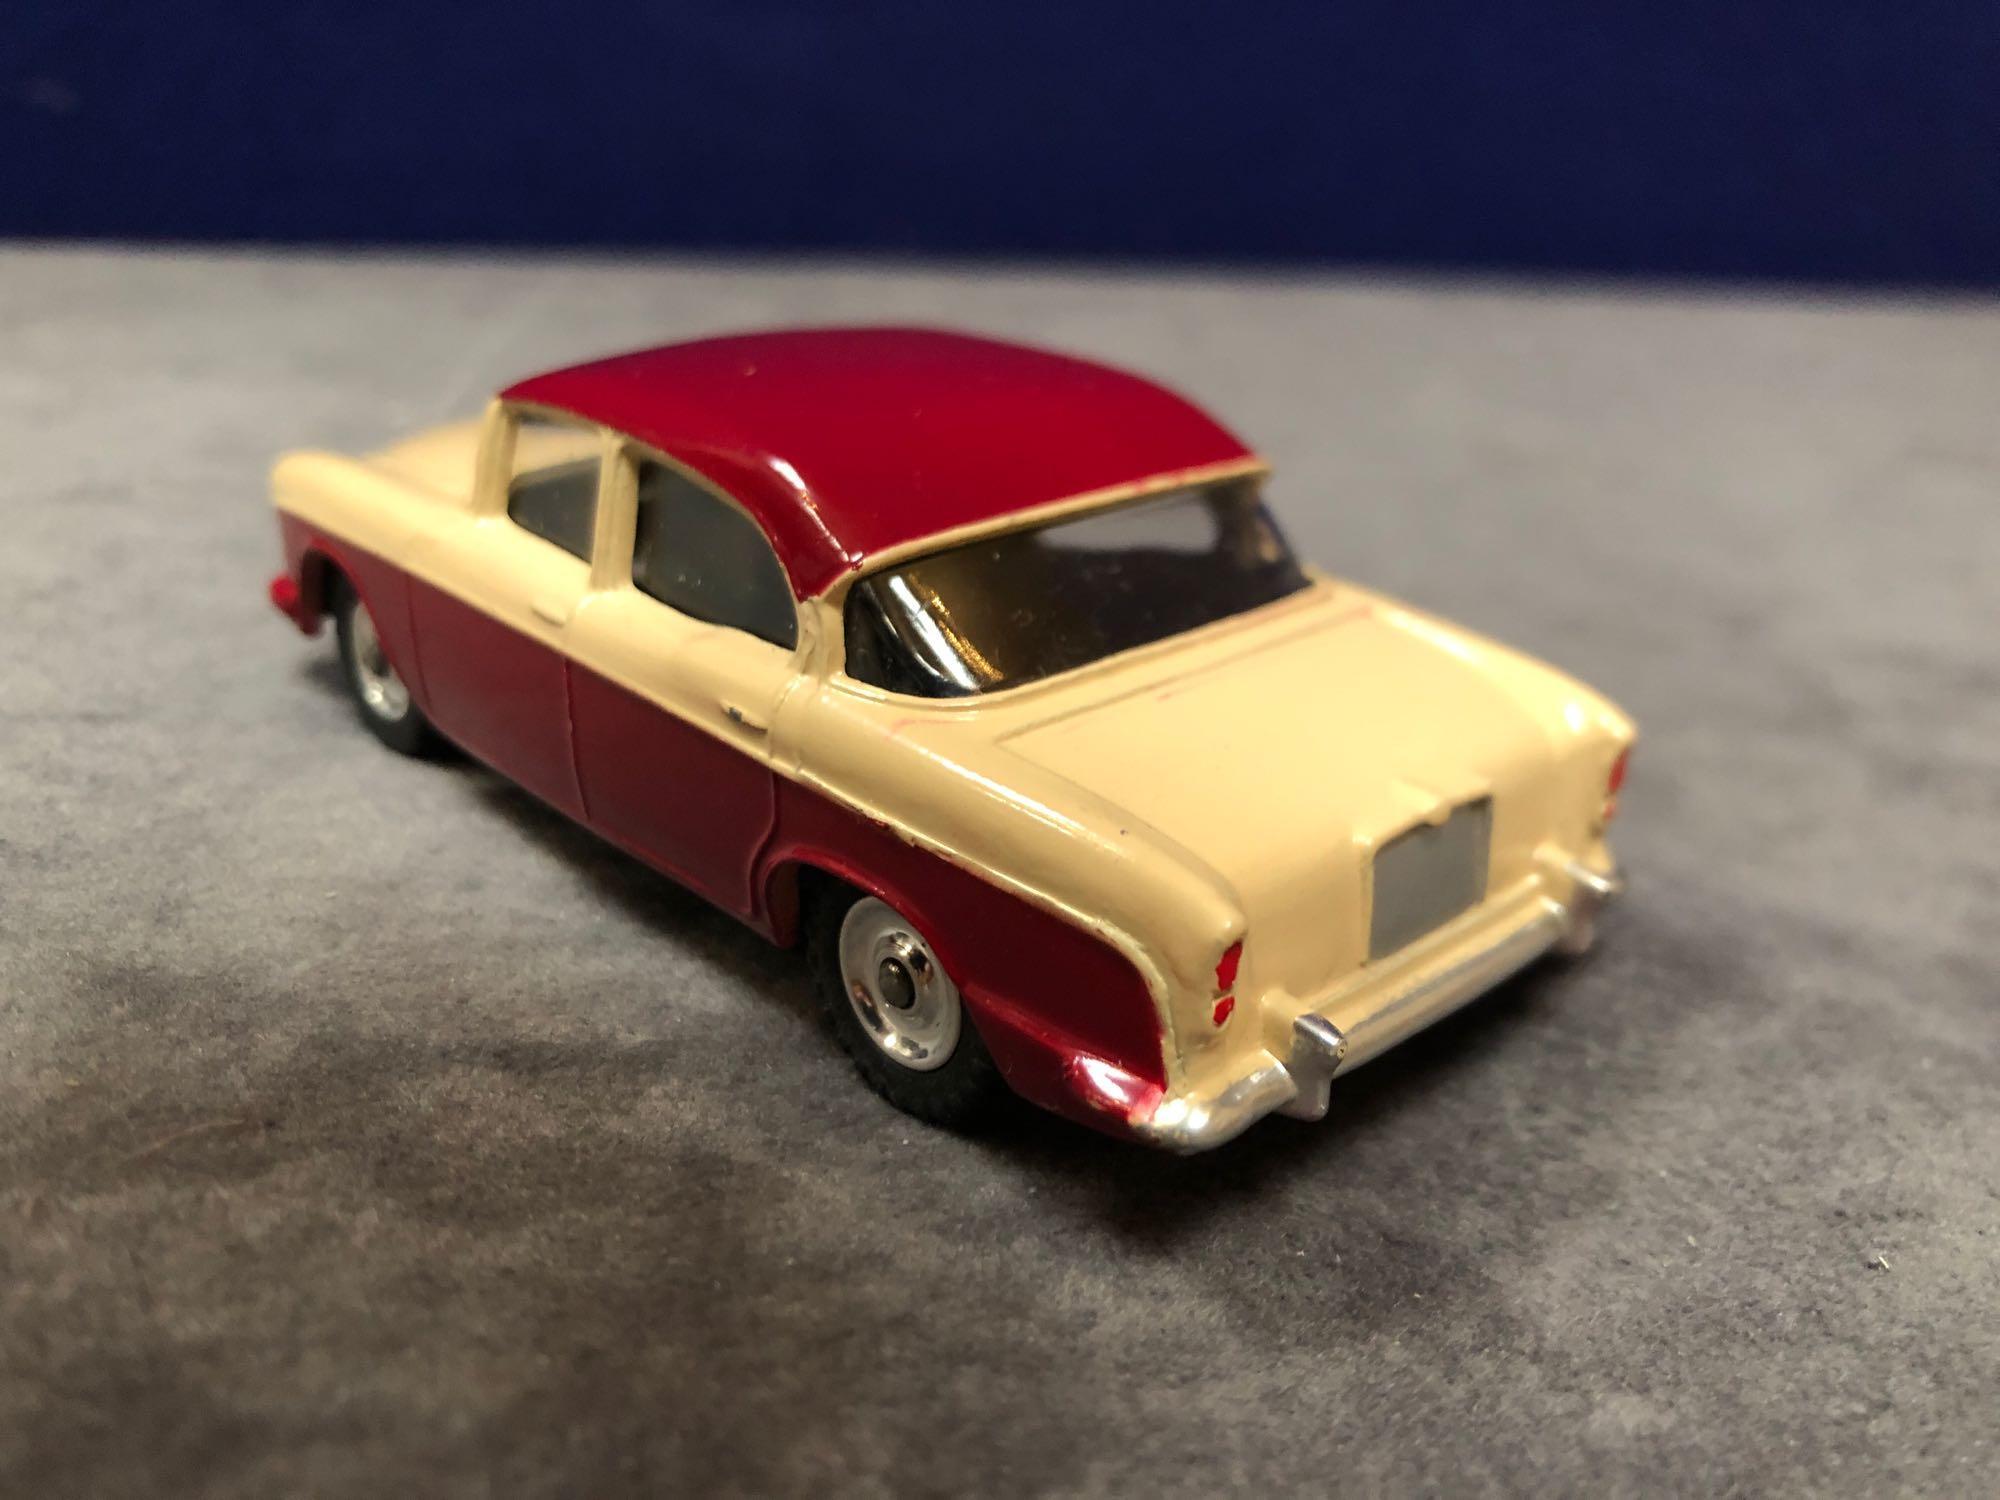 Dinky #165 Humber Hawk Maroon/Fawn - Spun Hubs With Box 1959-1963 - Image 3 of 4